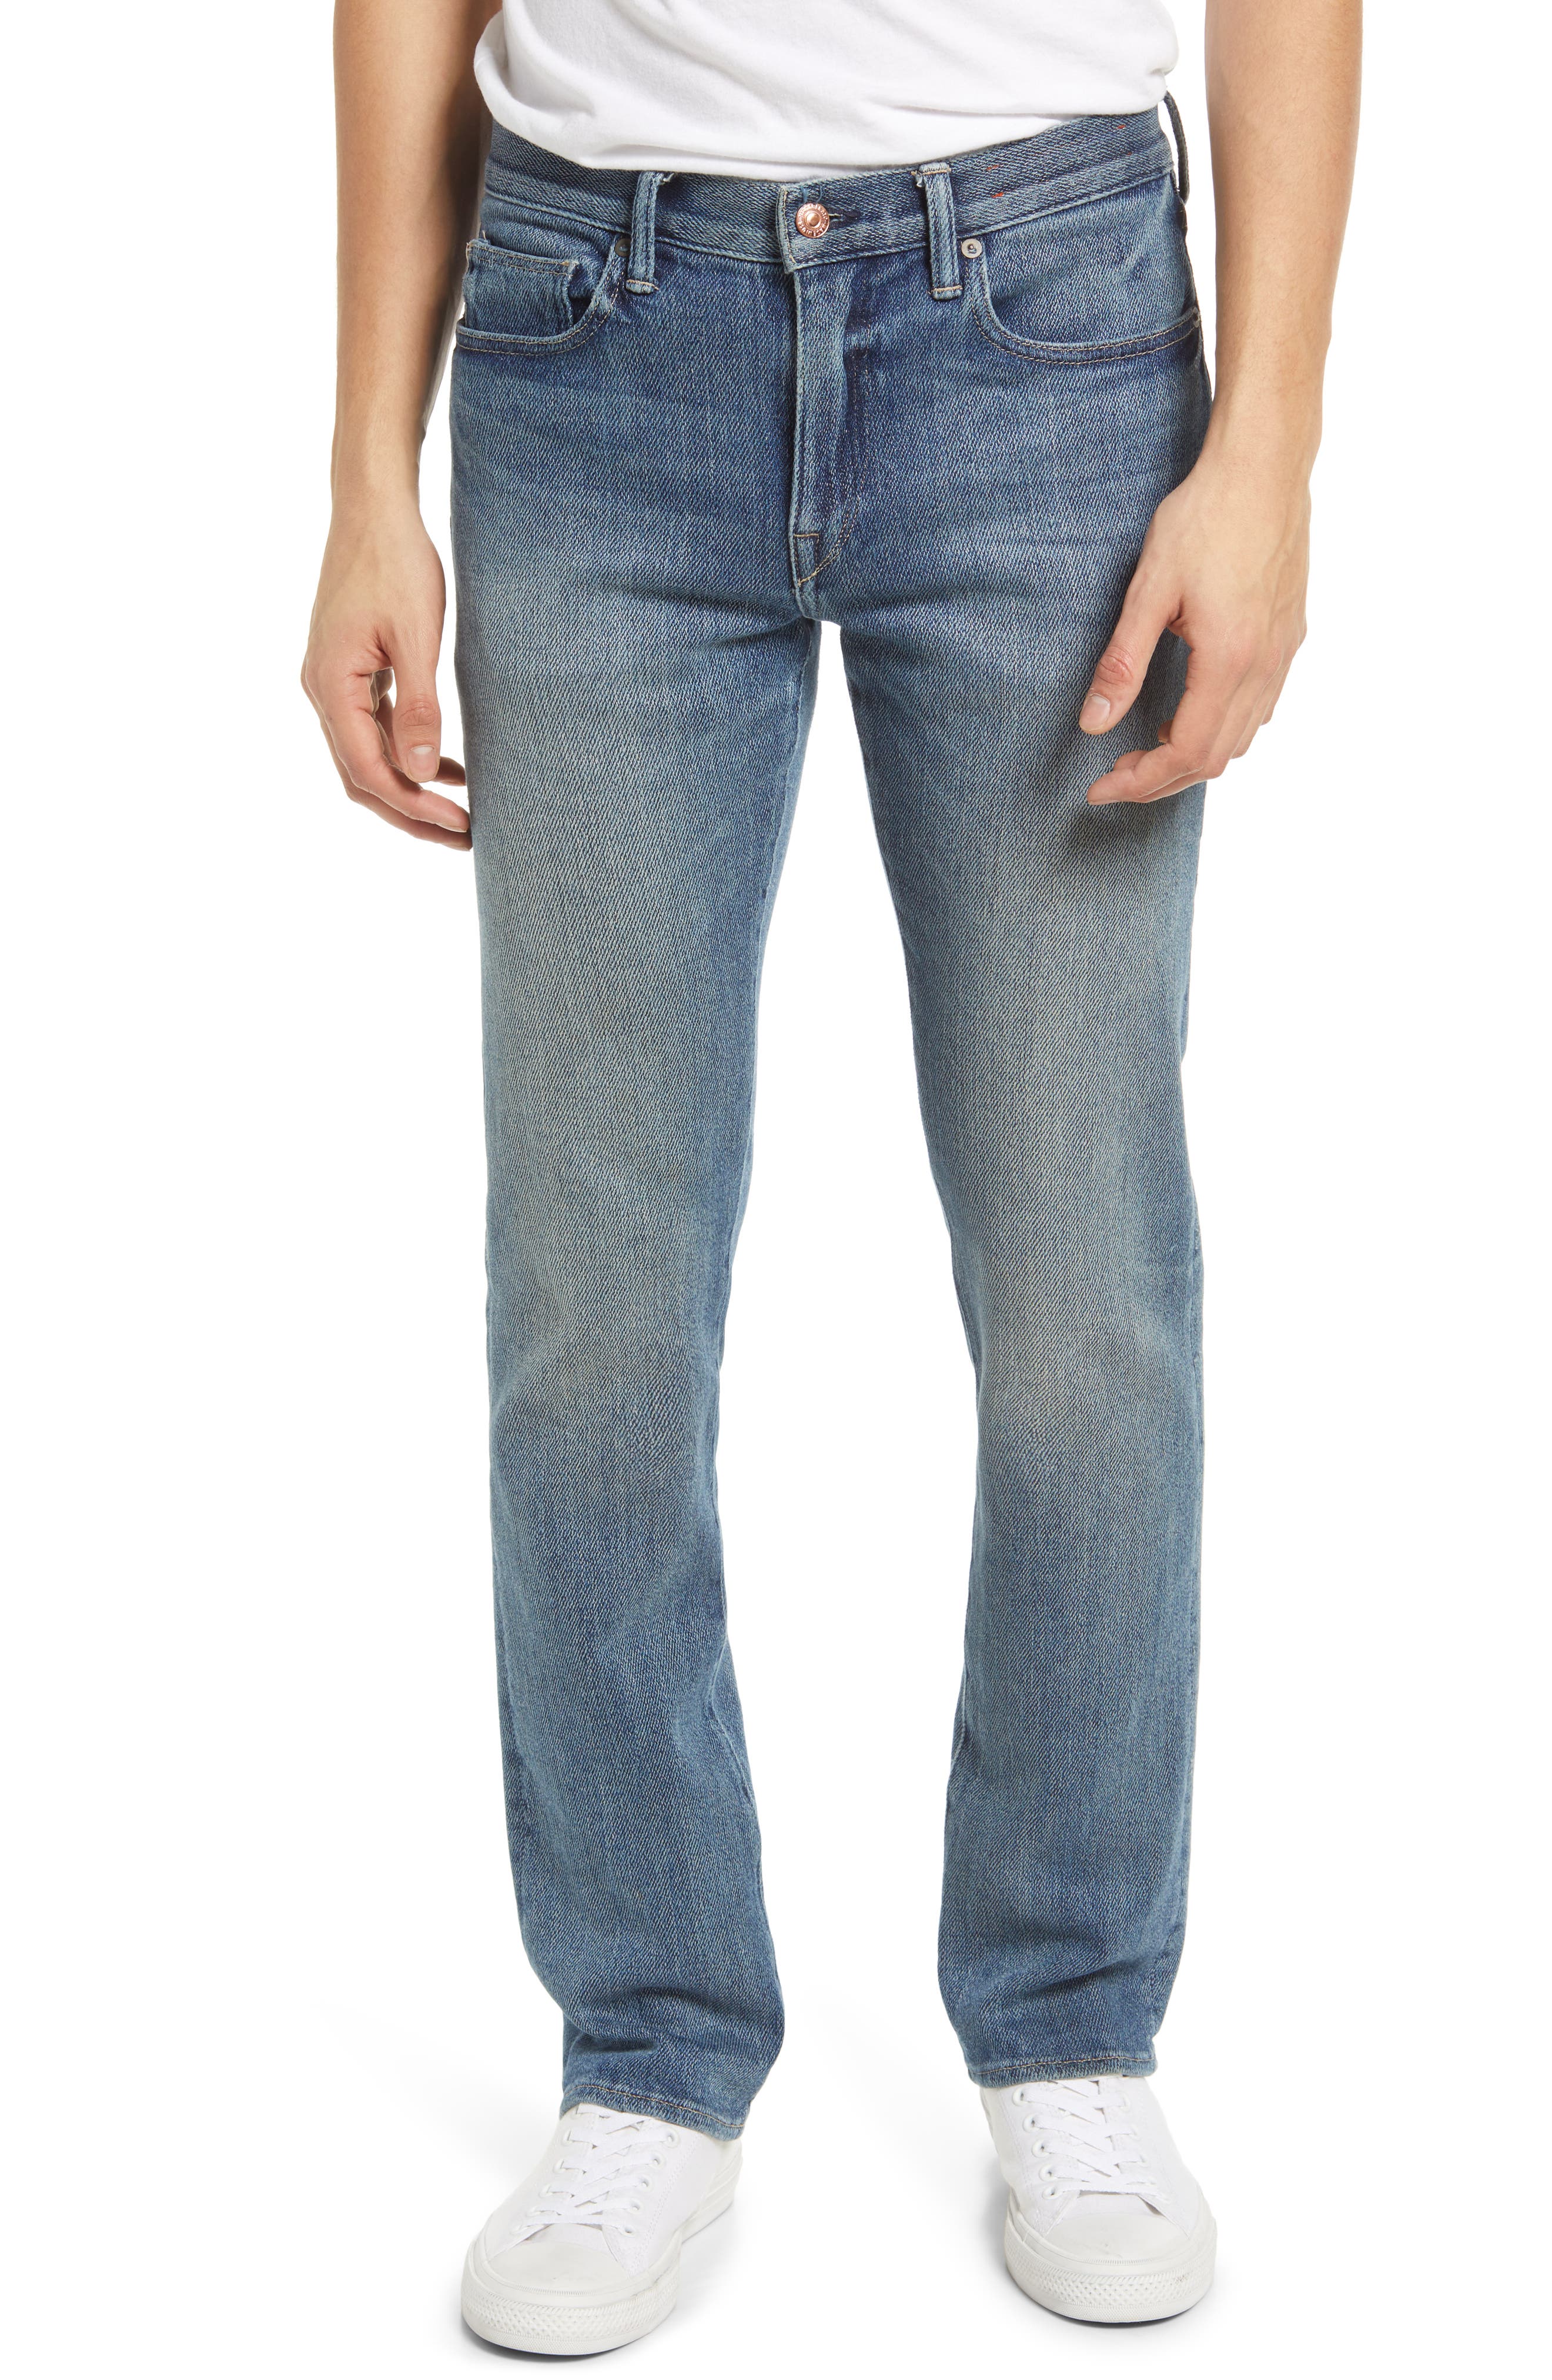 HIROSHI KATO The Pen Slim 11.5-Ounce Air Stretch Selvedge Jeans in Joey